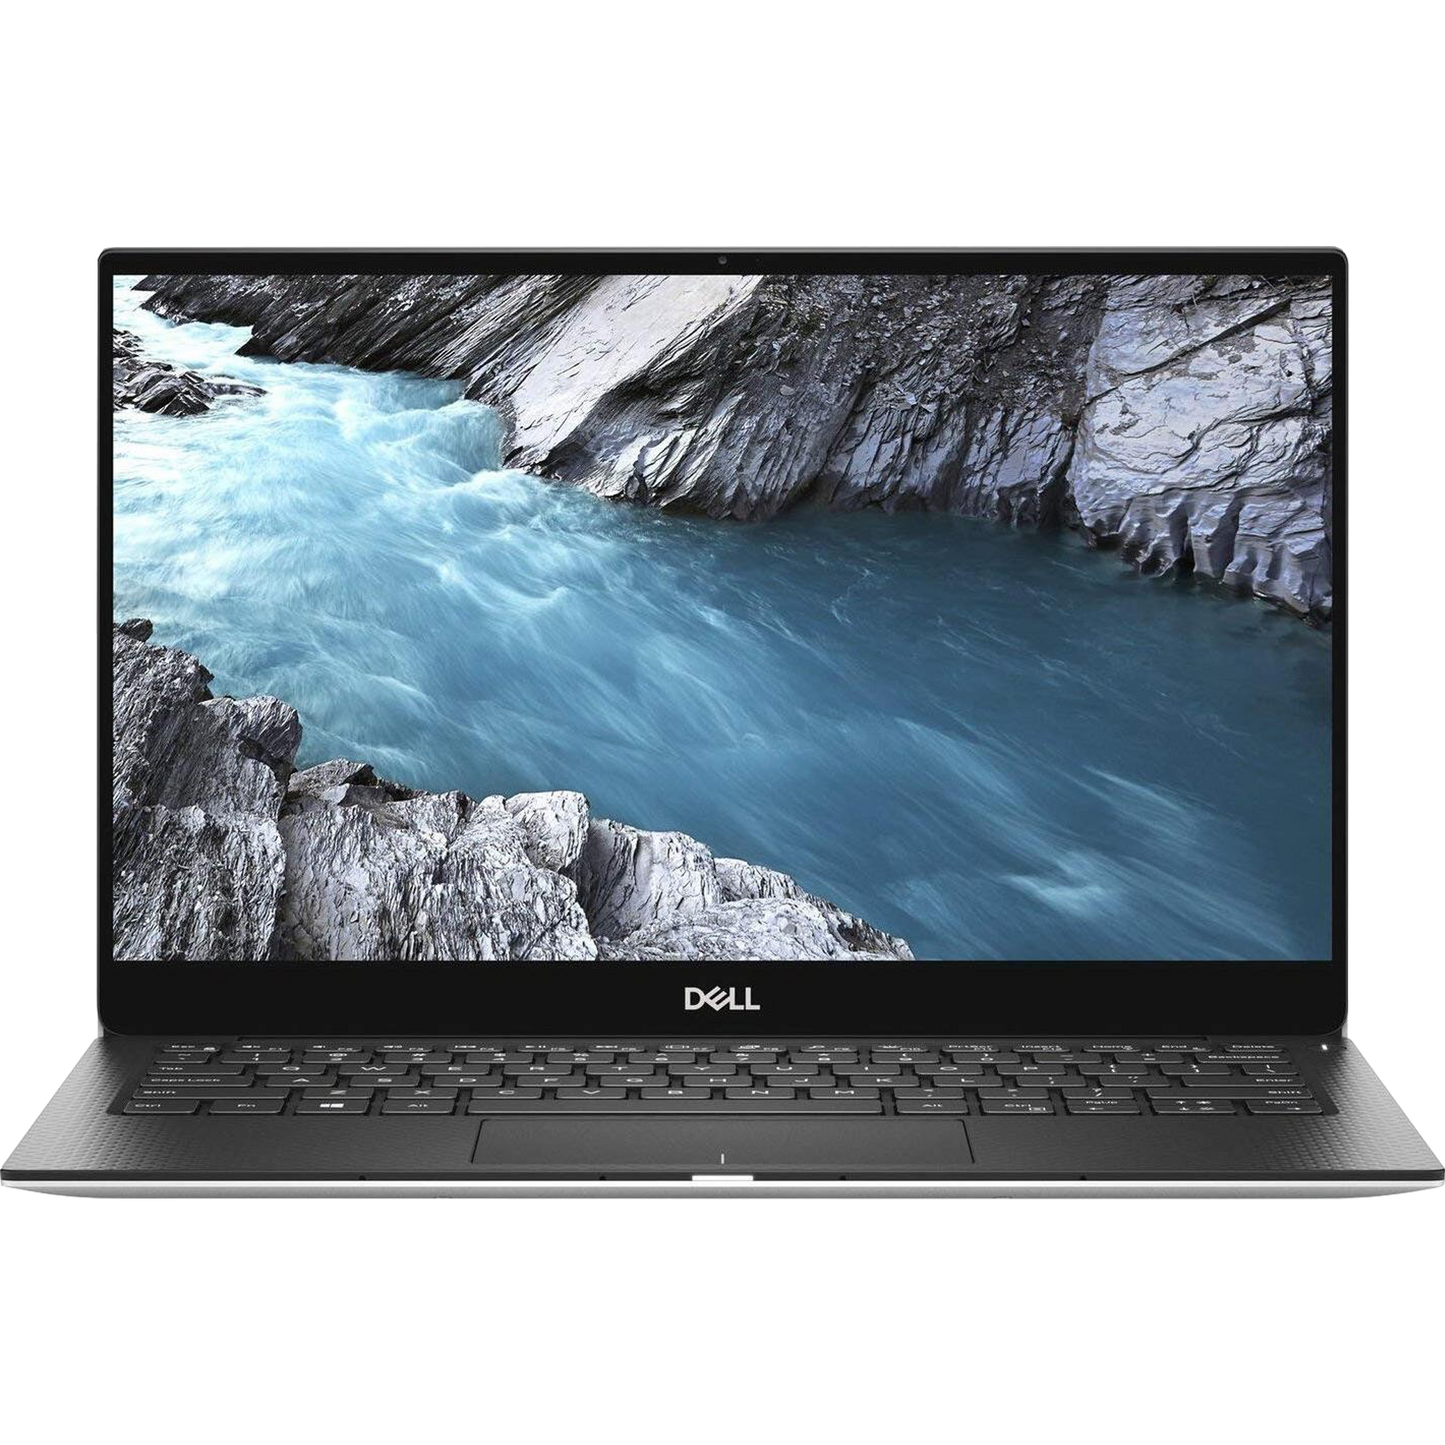 Dell XPS 13 (9380) Intel i5, 8th Gen Laptop with Win 11 Pro Laptops - Refurbished